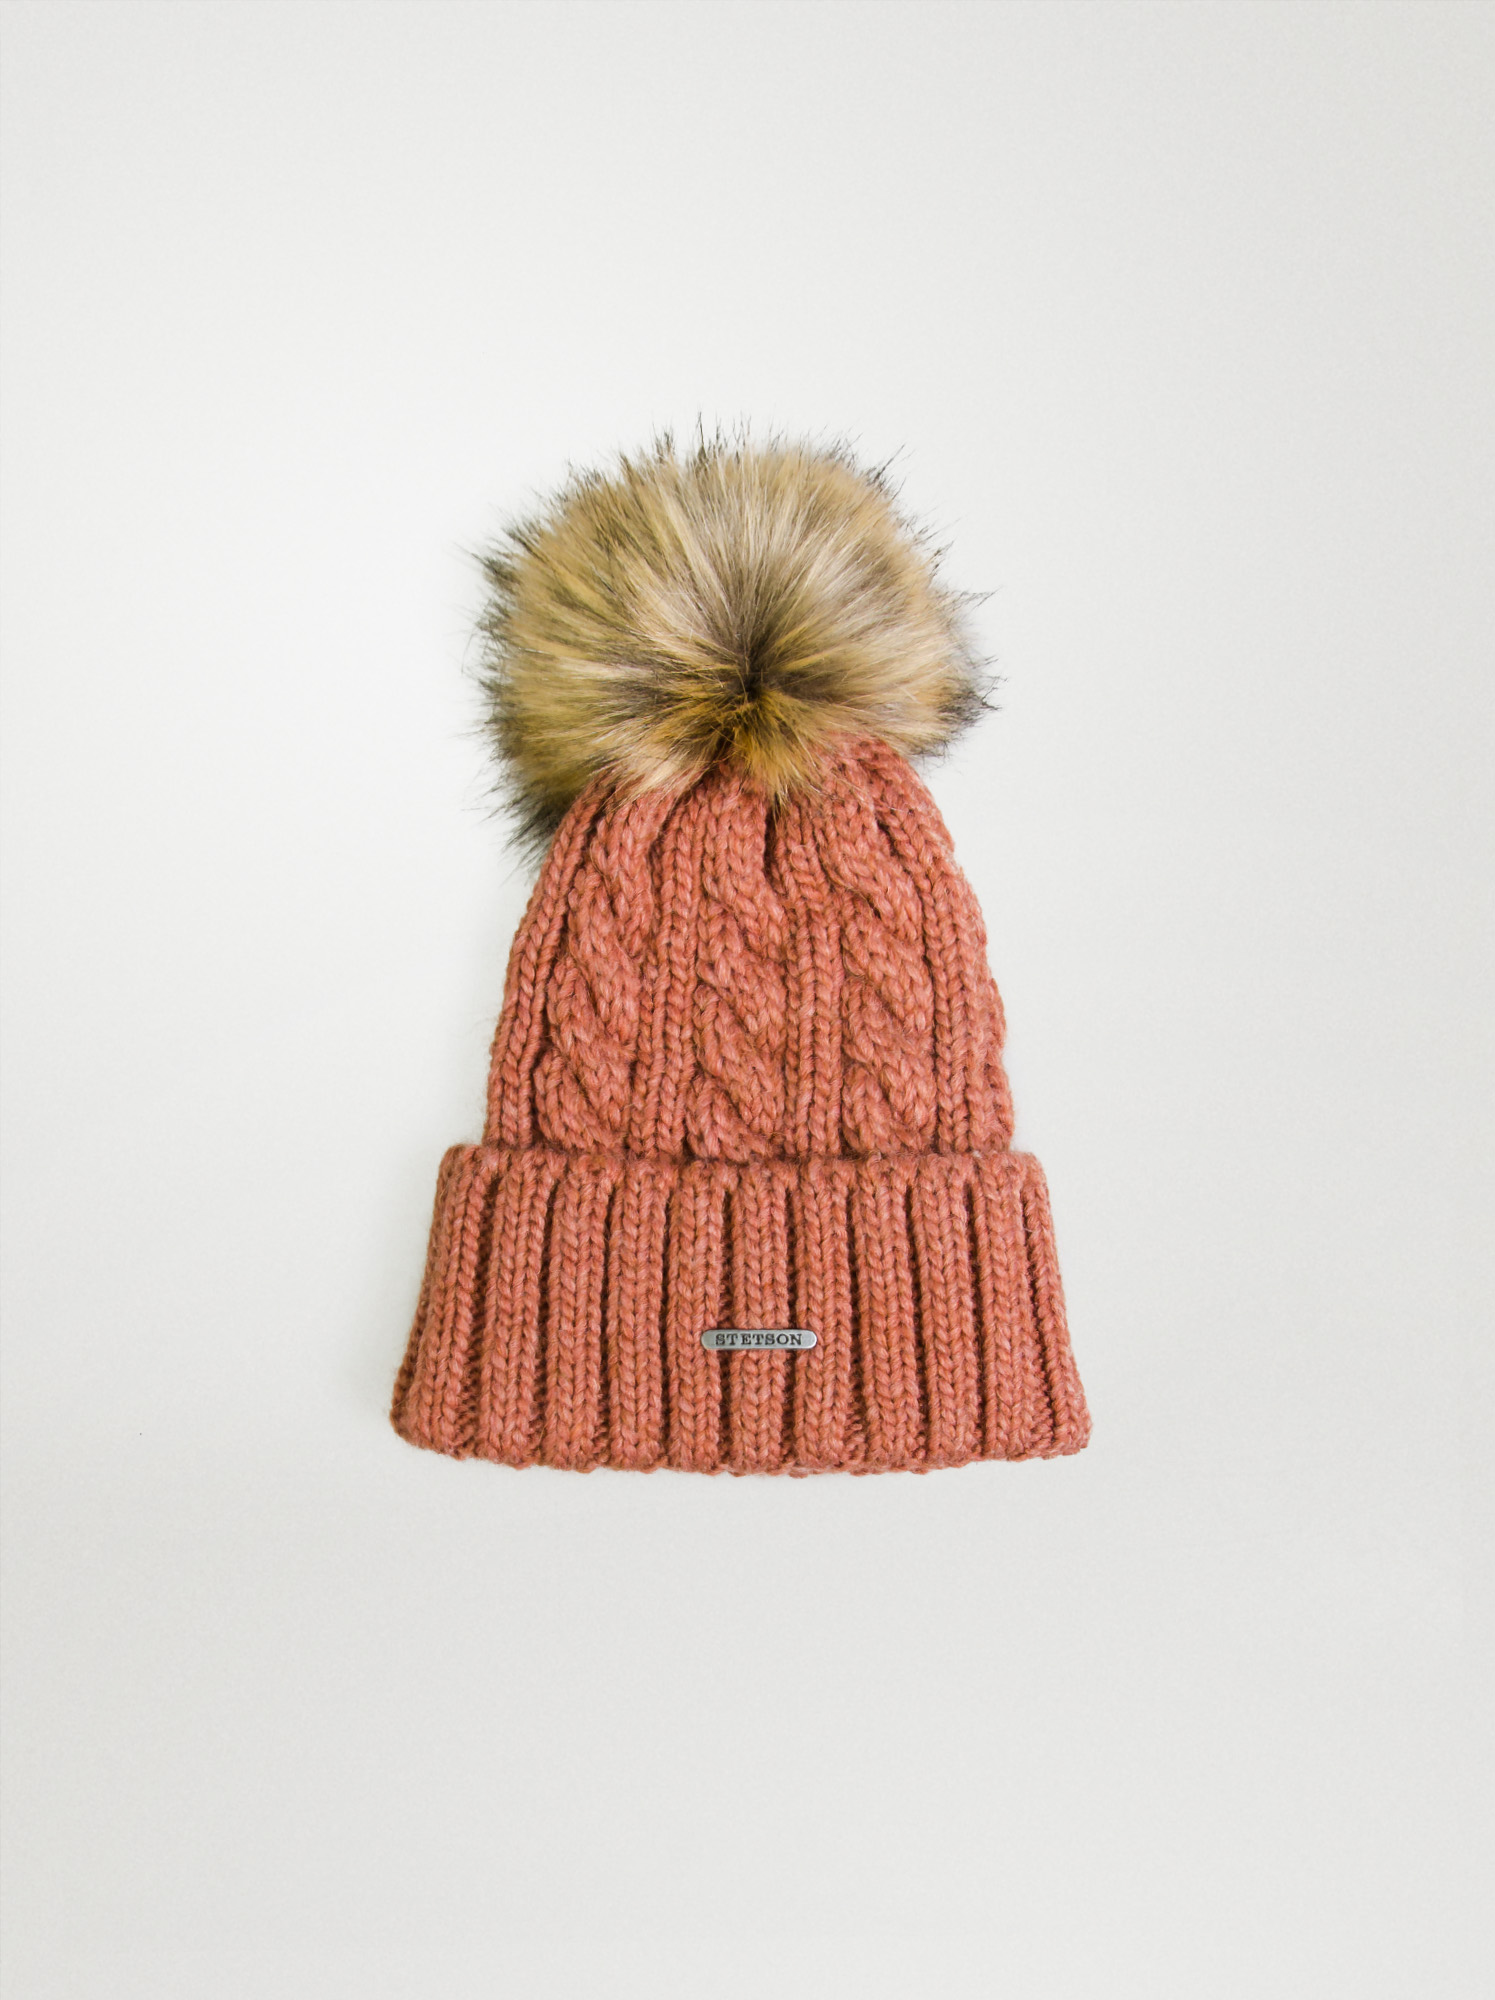 STETSON Beanie Pompom cap with wool - Stetson image 1